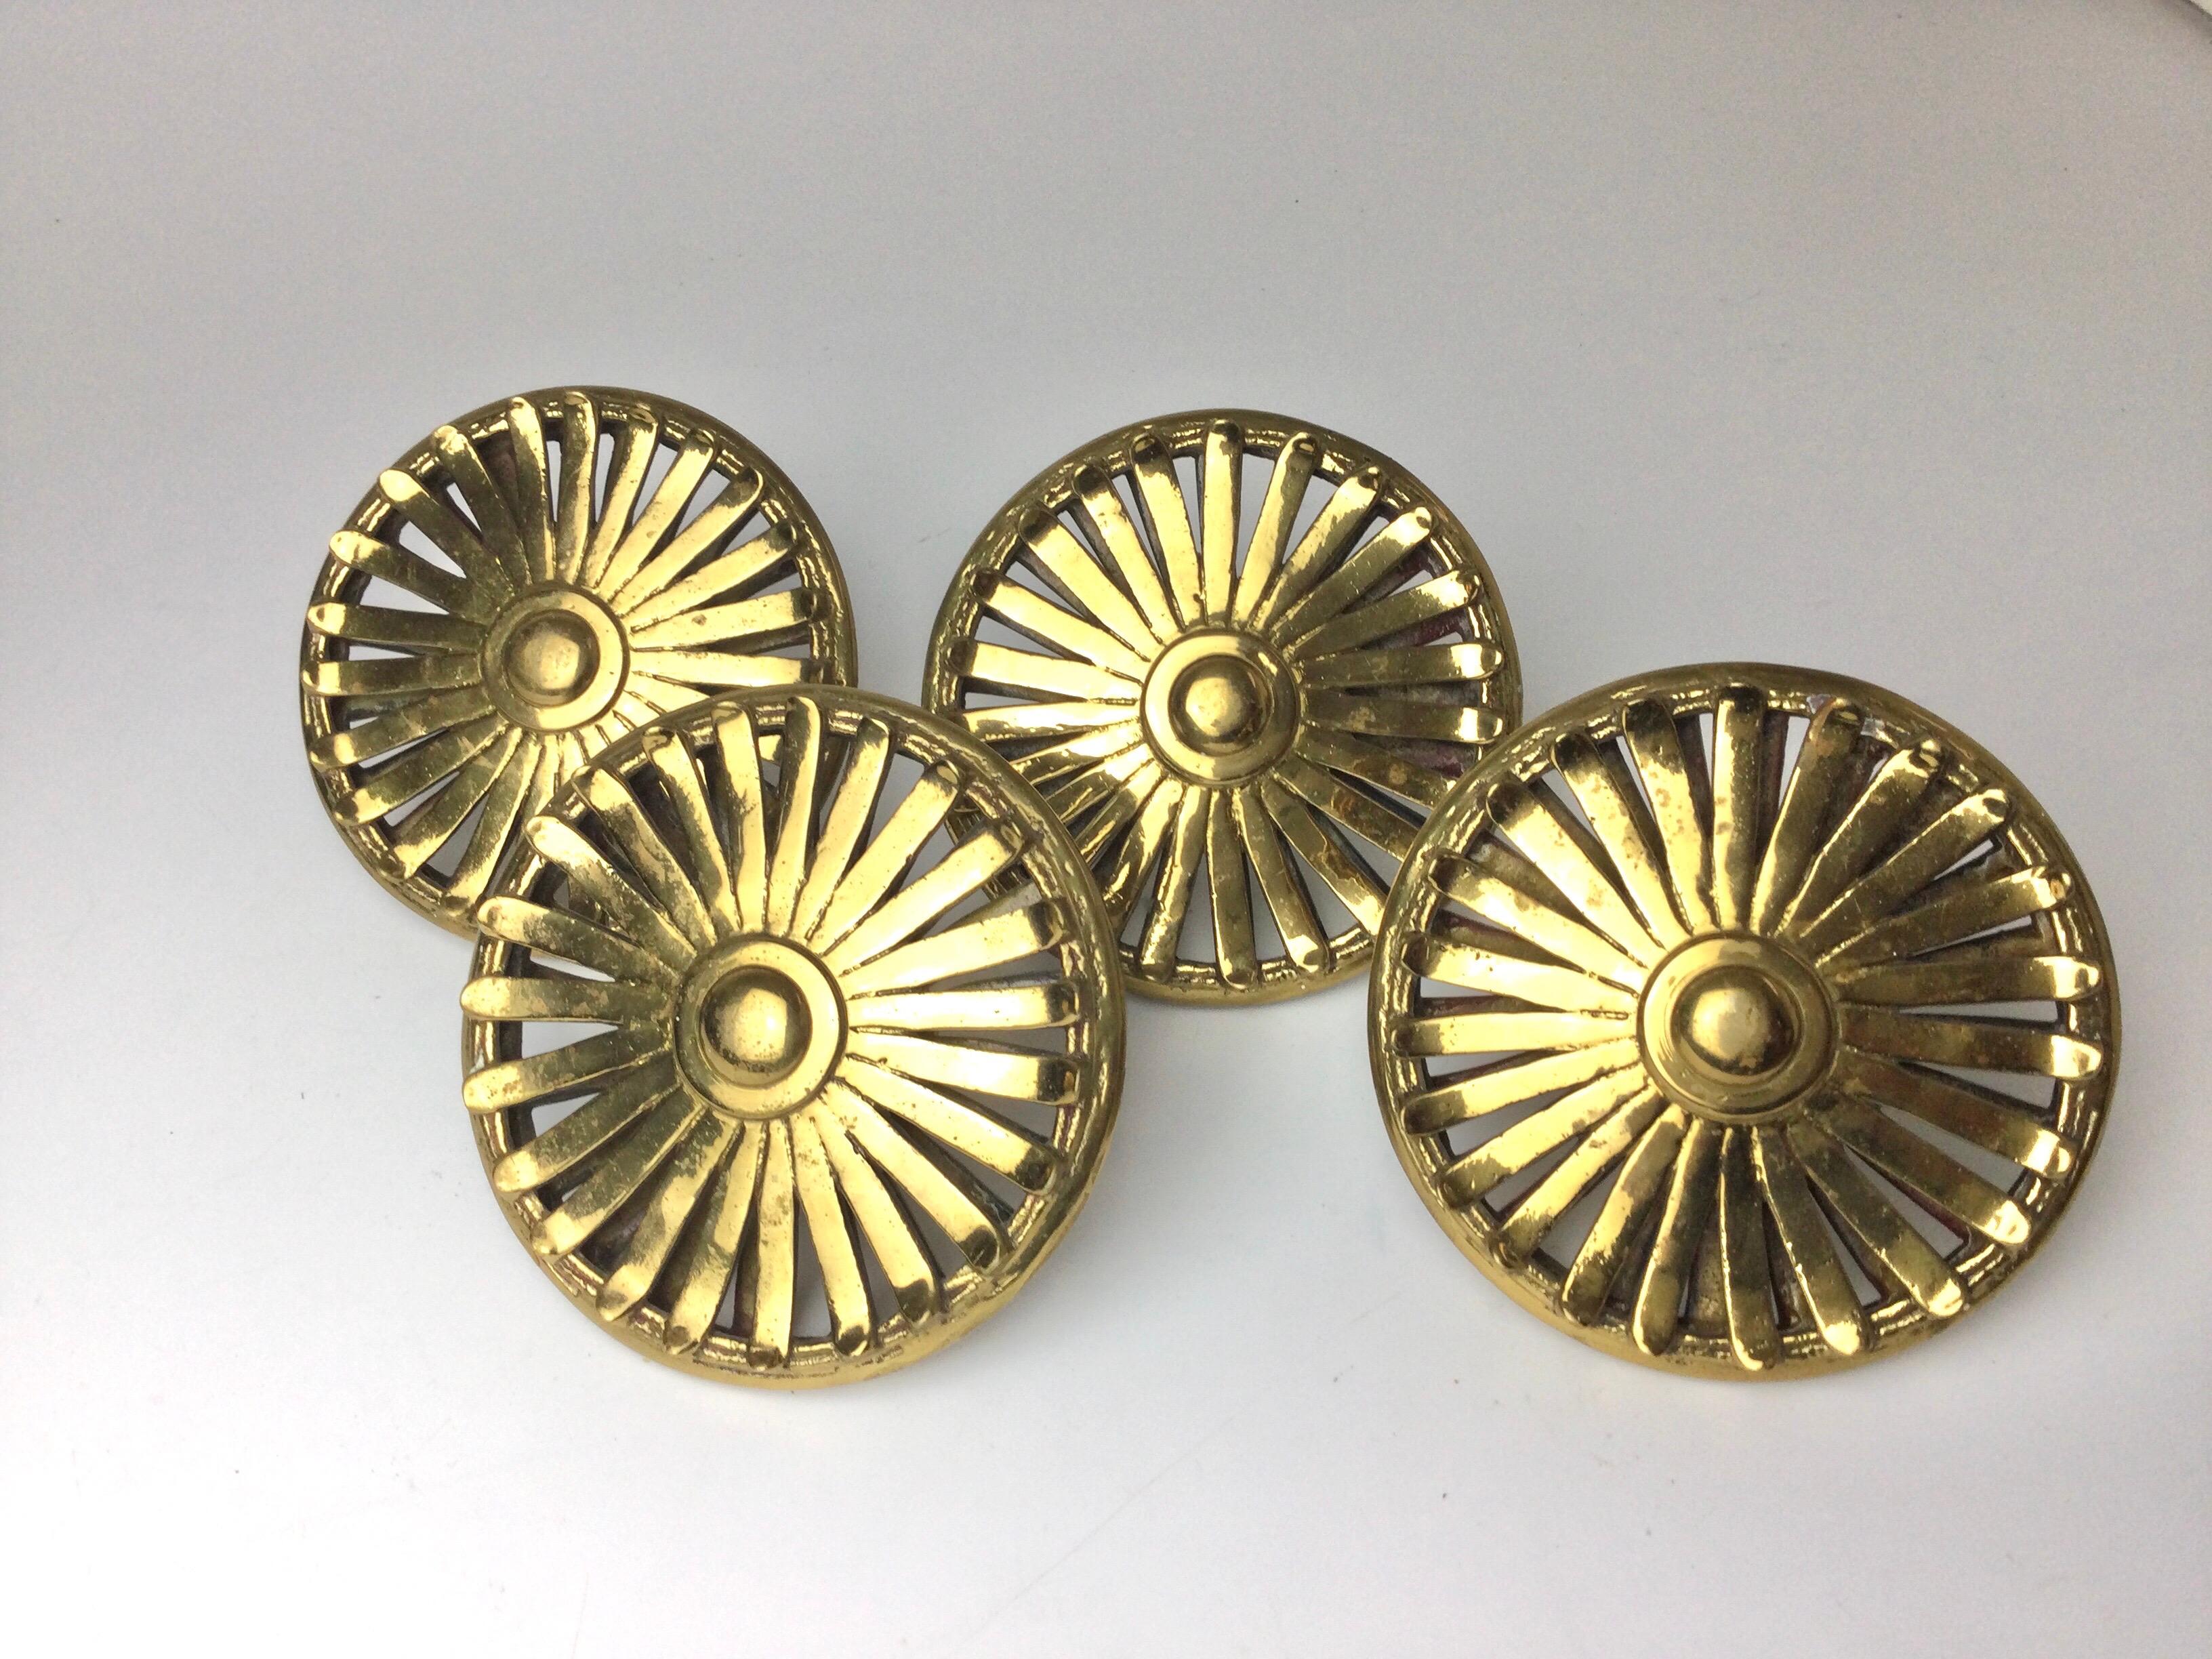 Set of 4 mid century oversized 1950's round brass door pulls. Came of a set of bi-fold closet doors of a 1950's home that was being remodeled. Oversized 5' in diameter.